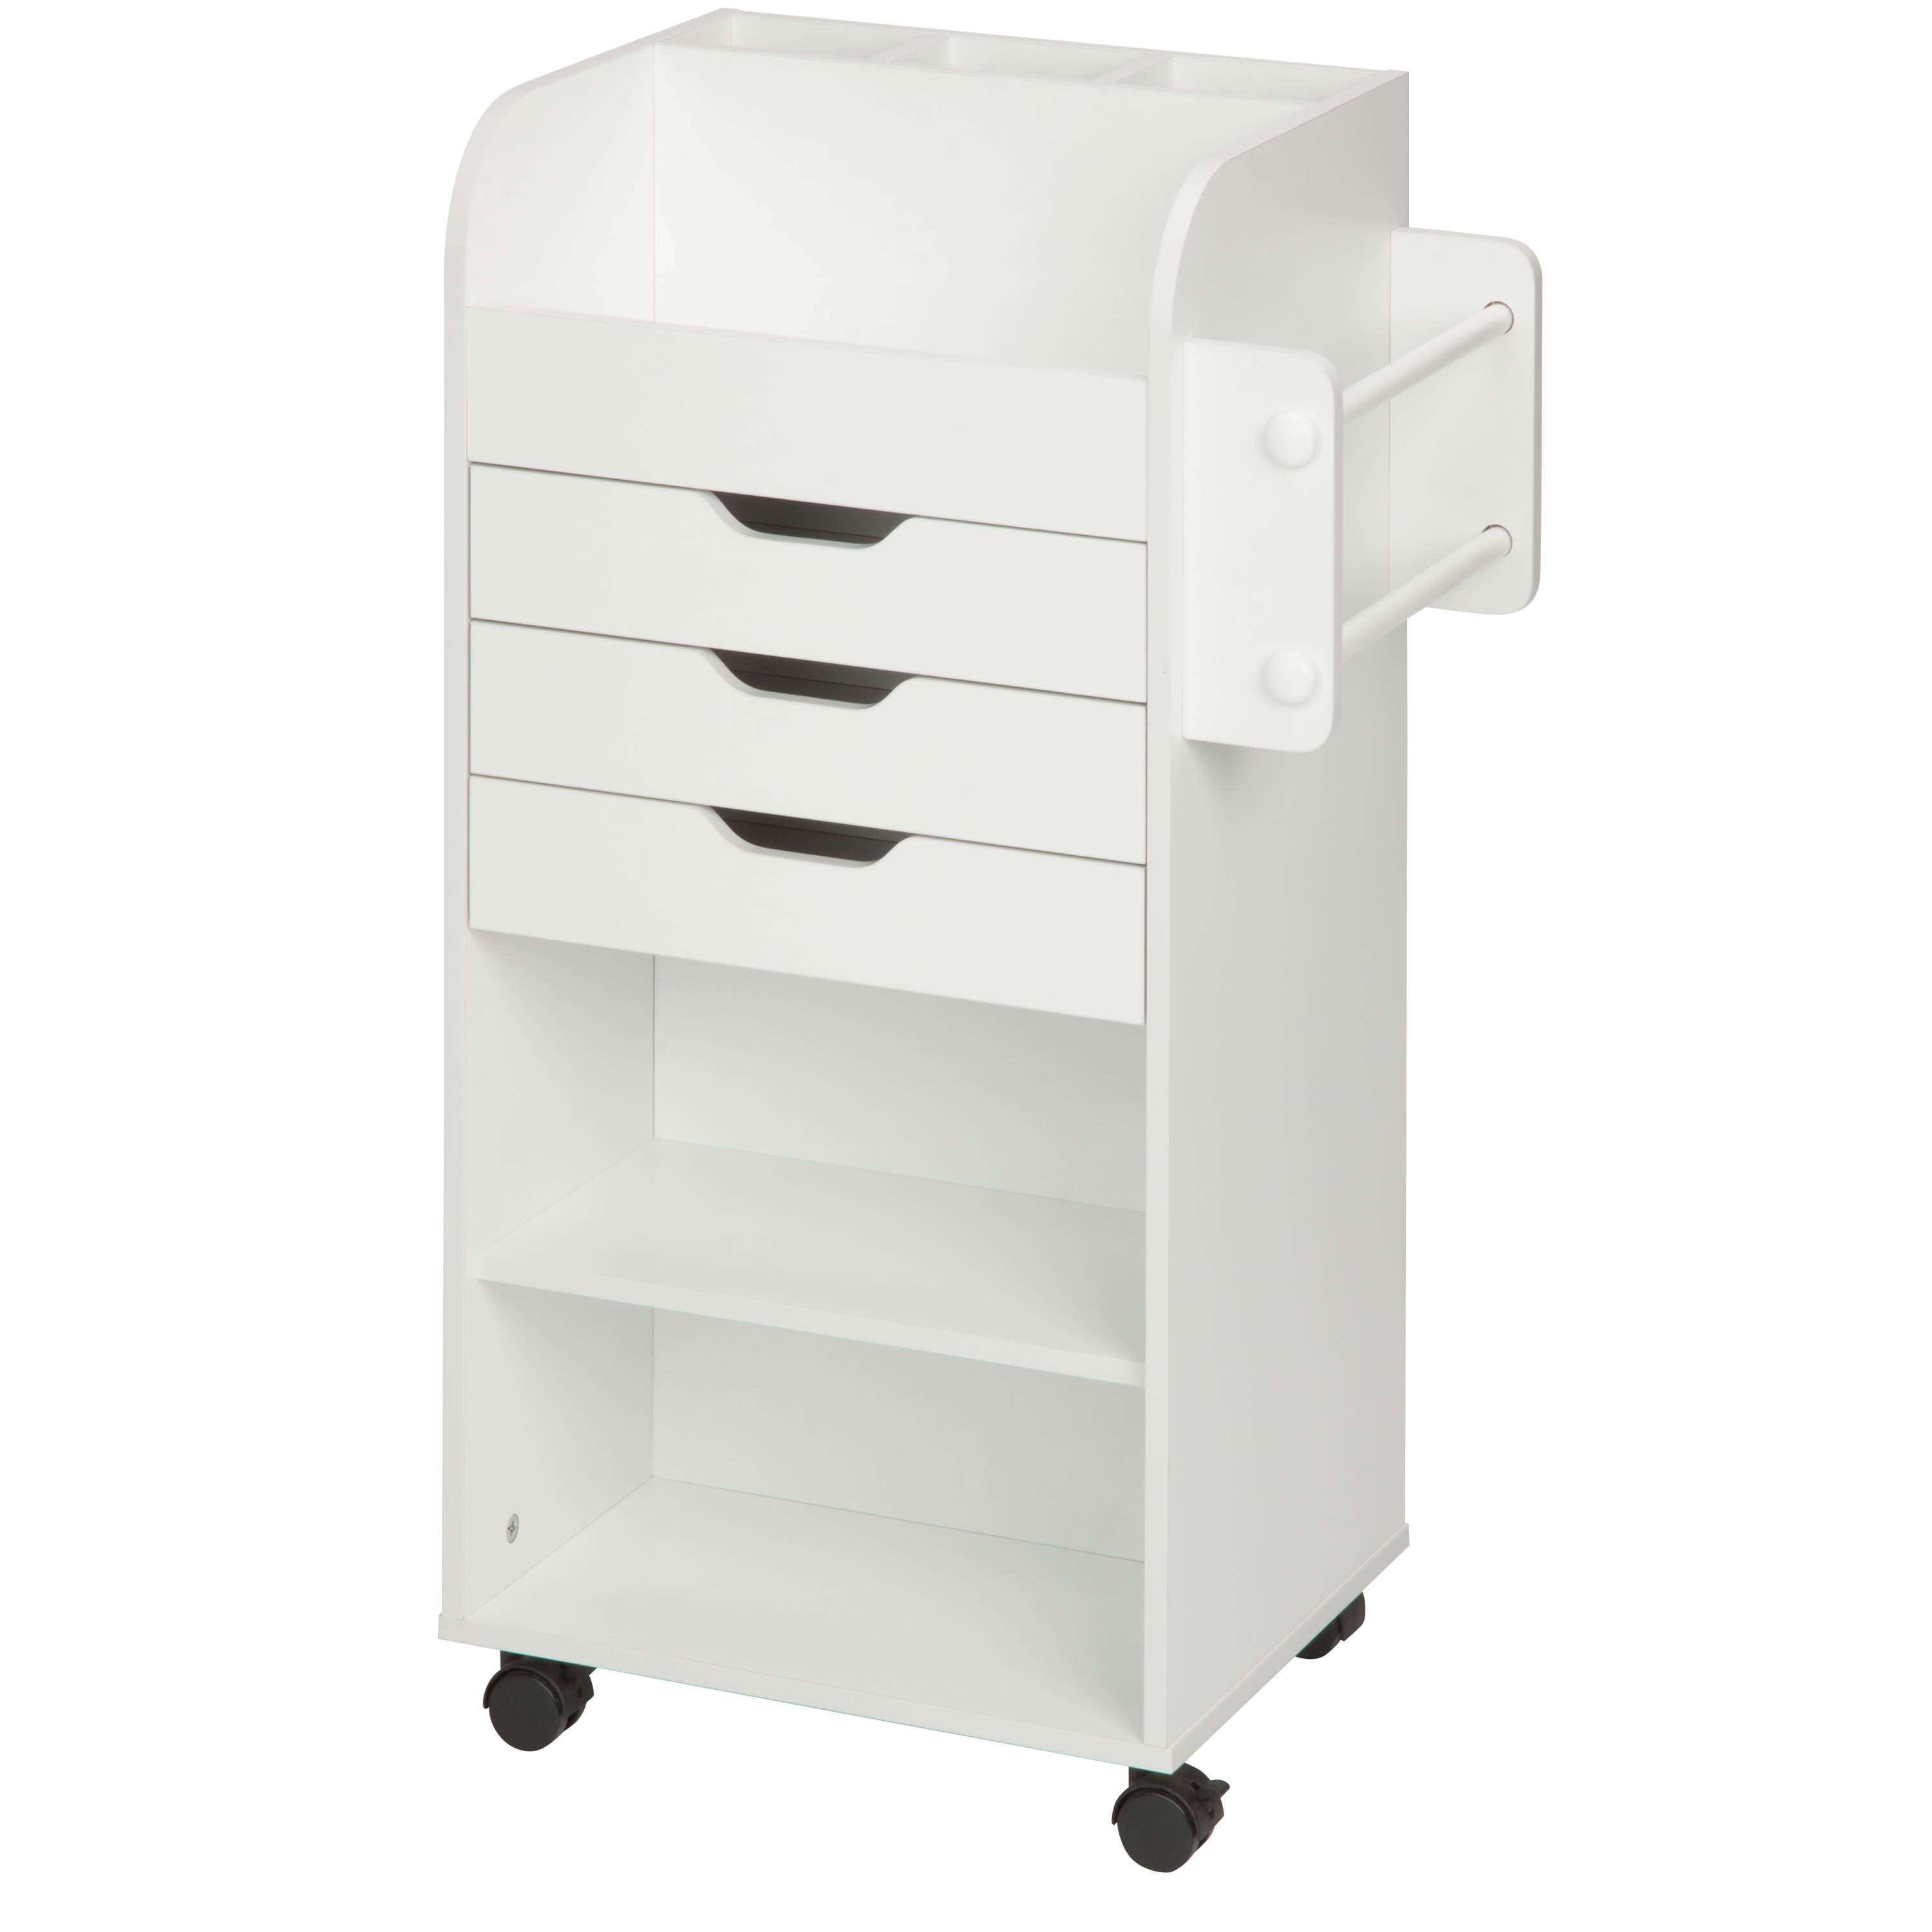 Honey-Can-Do 6-Tier Wood Rolling Craft Storage Cart, White - image 1 of 9